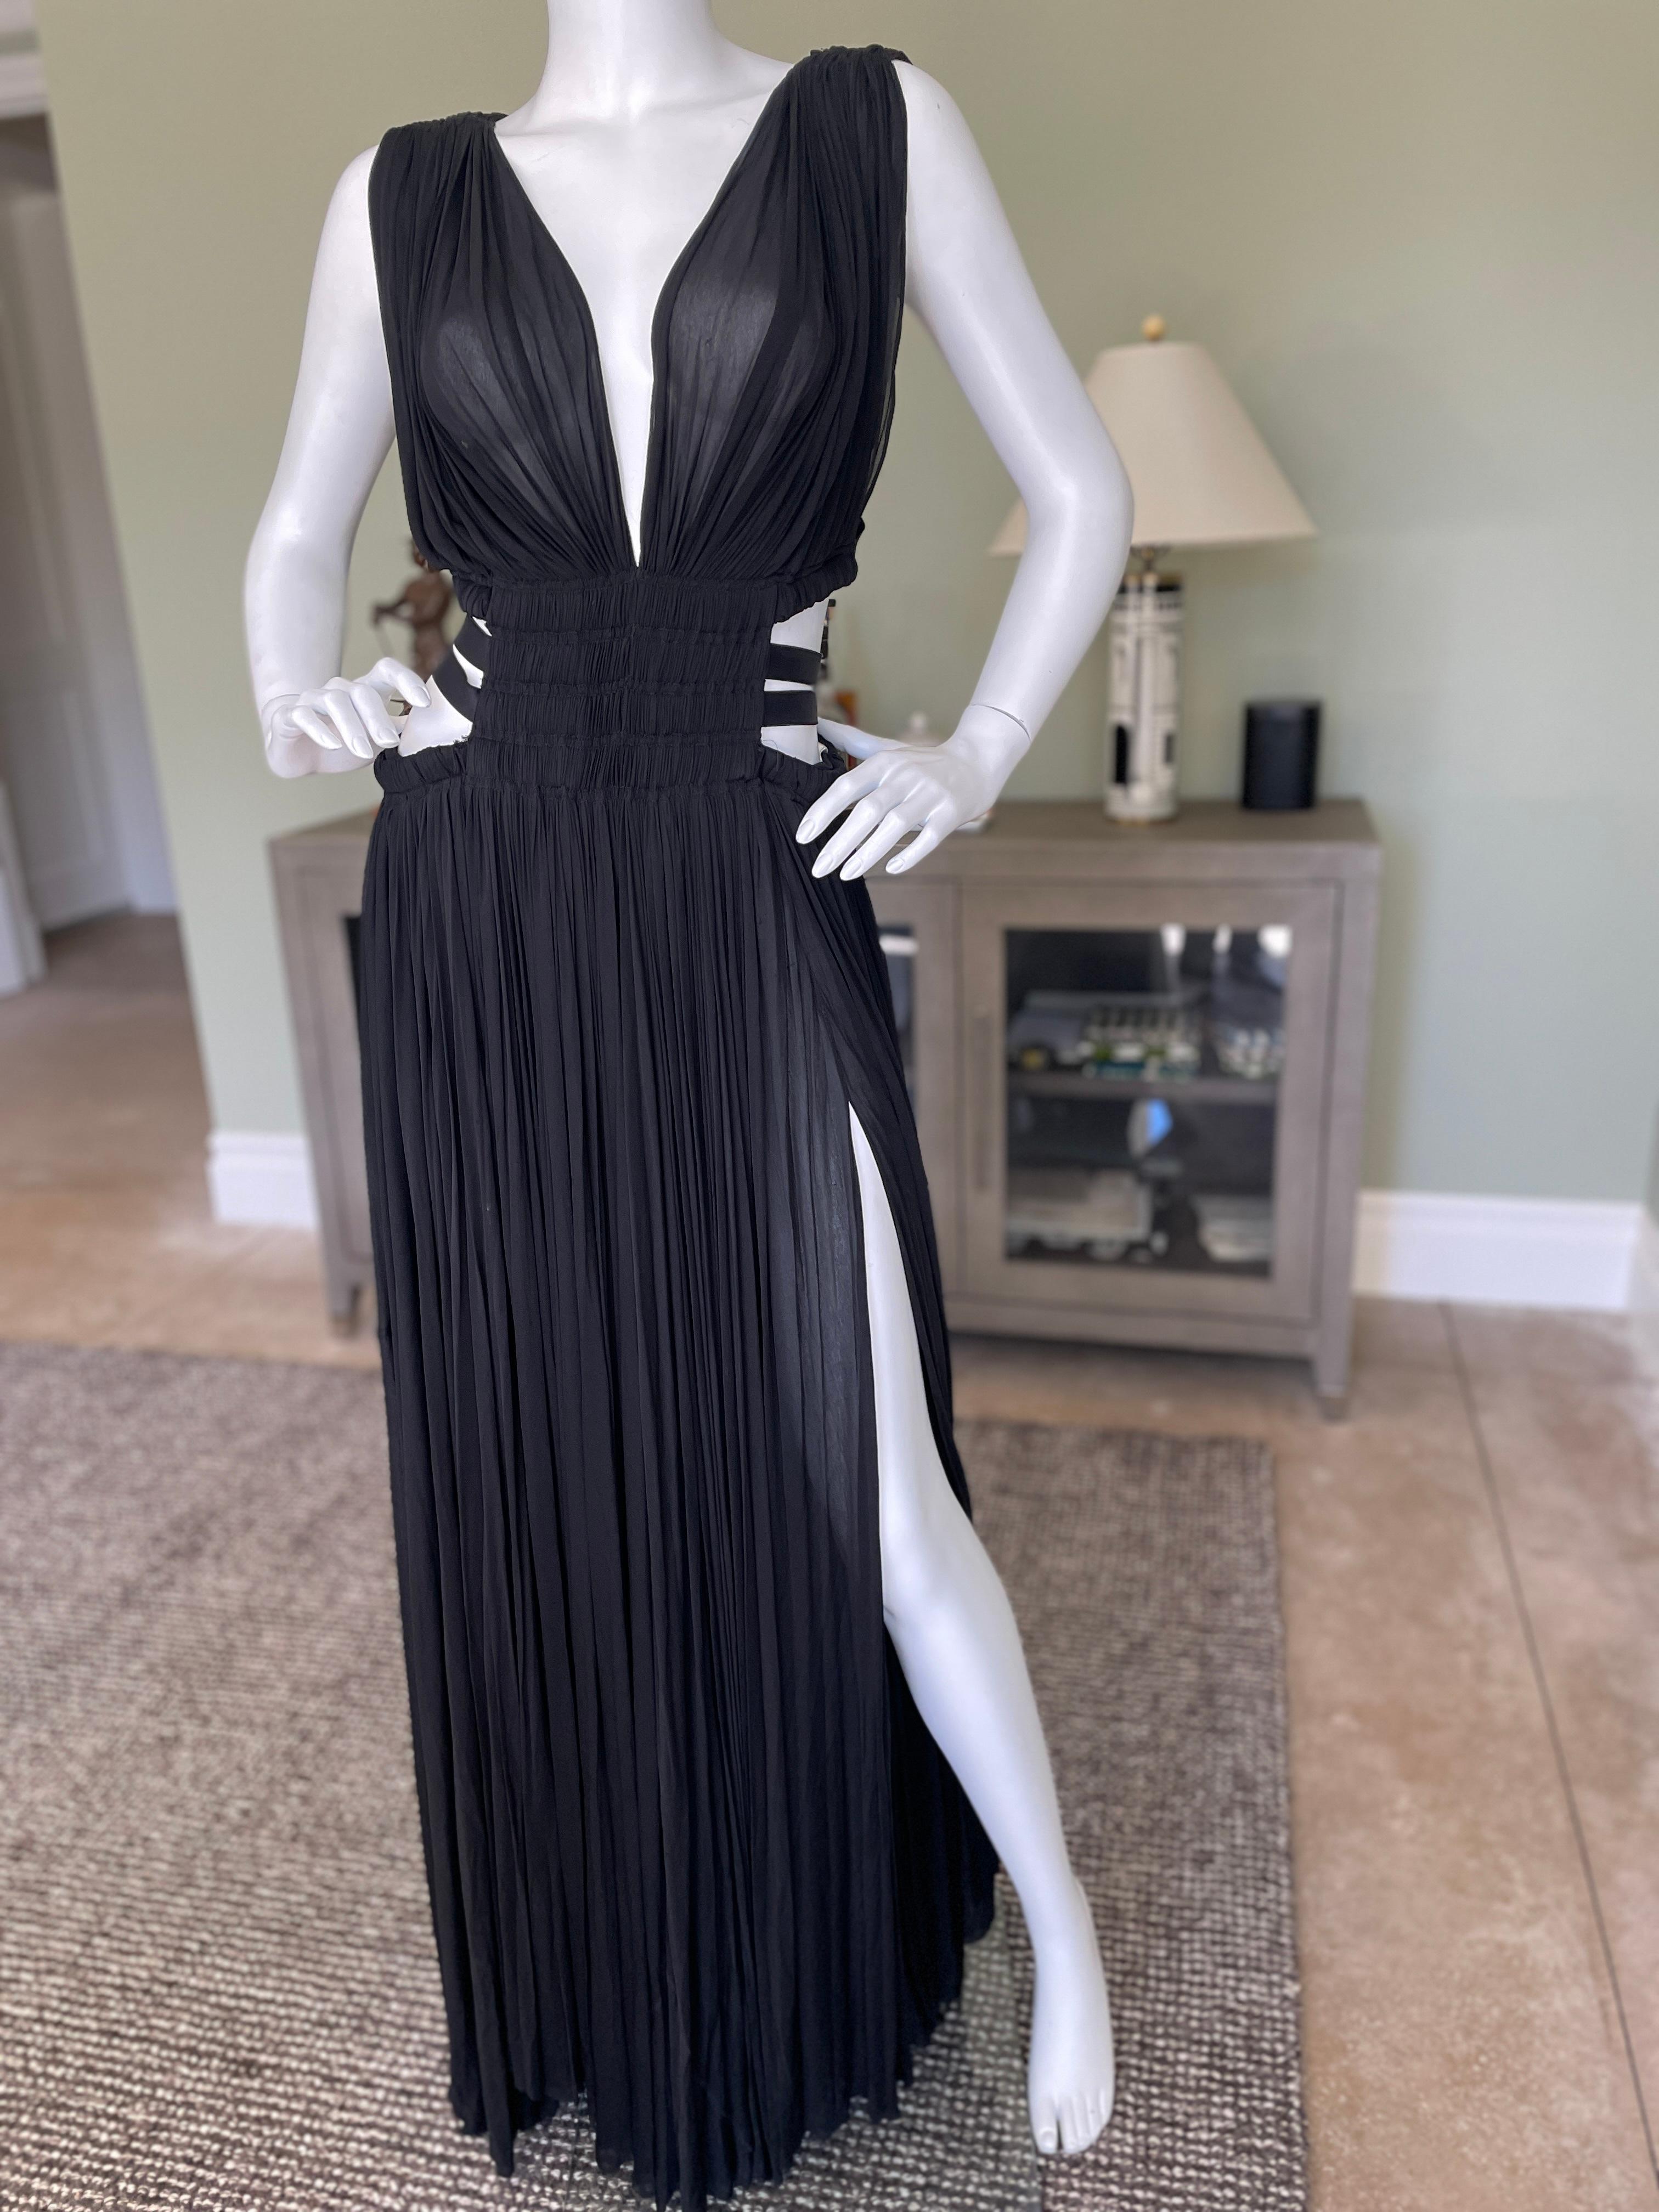 Azzedine Alaia 2004 Semi Sheer Black Pleated Goddess Gown with Side Straps.
This is the original 2004 dress , not the reissue currently in stores.
There is a snap panty closure that attaches front to back.
 Size 40
 Bust 36